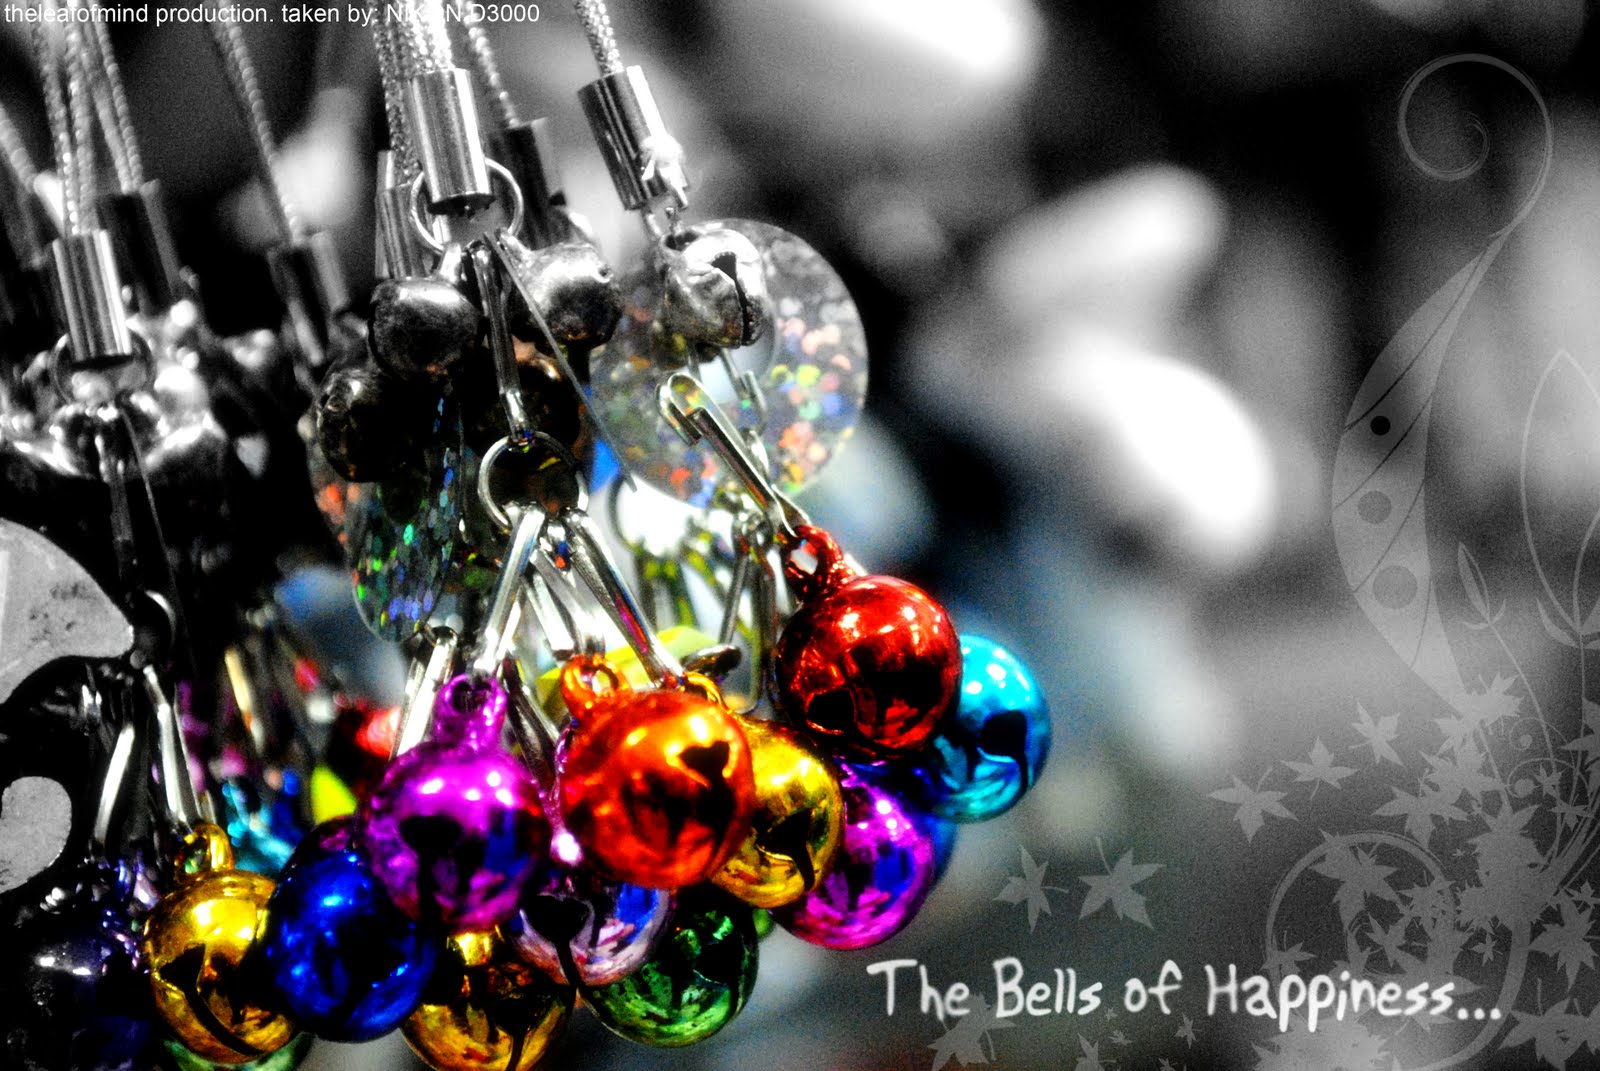 [The+Bells+of+Happiness+copy.jpg]